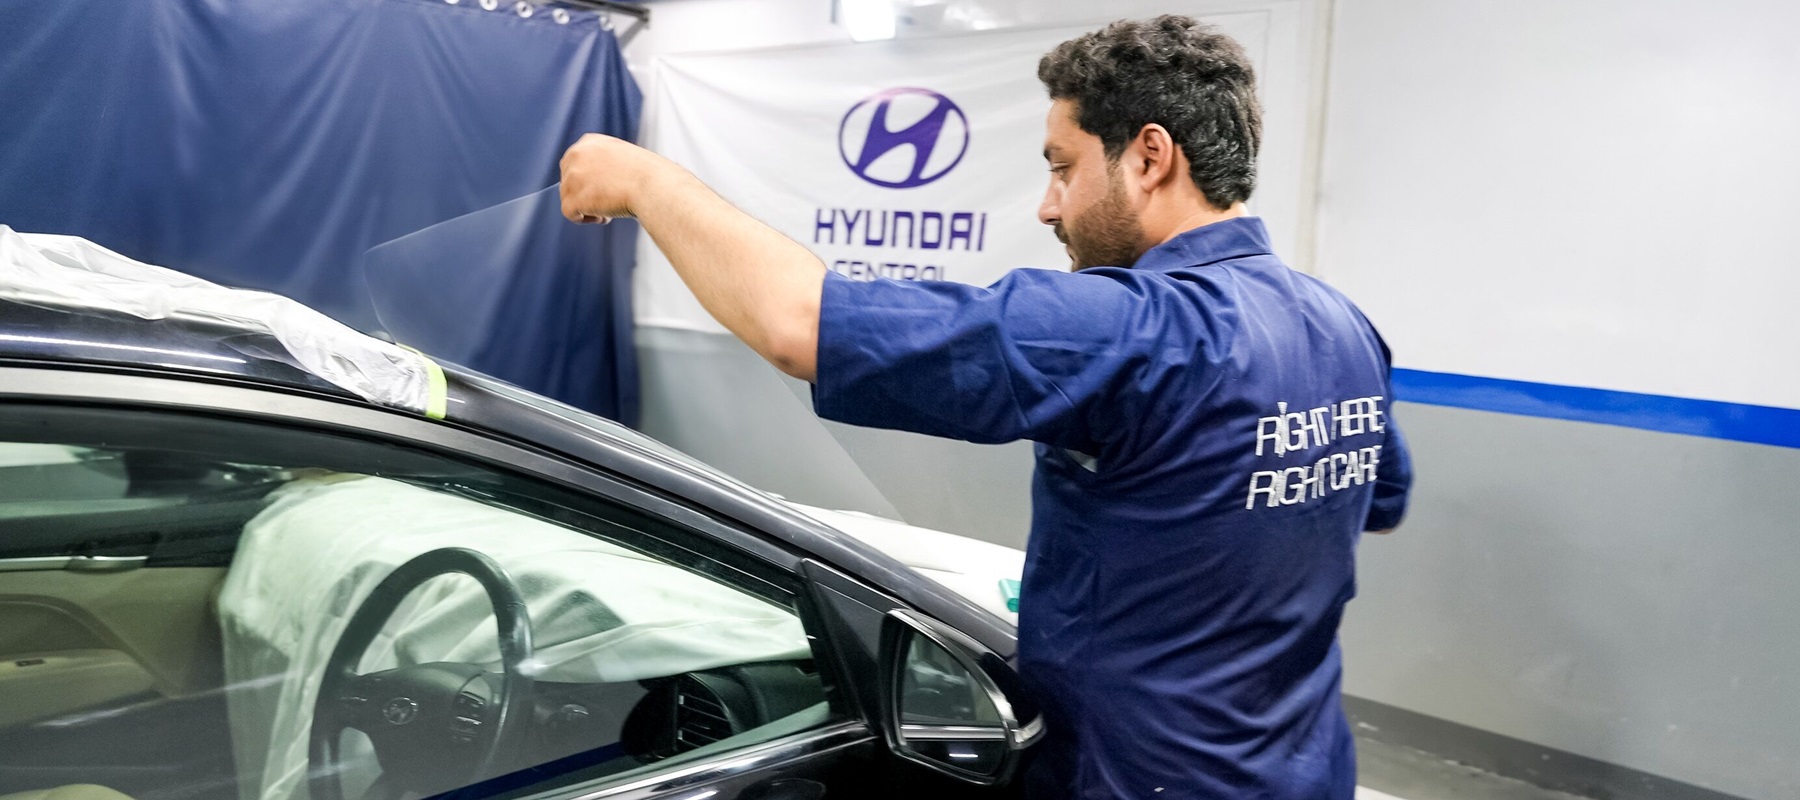 Hyundai Motor Group showcases innovative campaign at Cannes Lions Festival